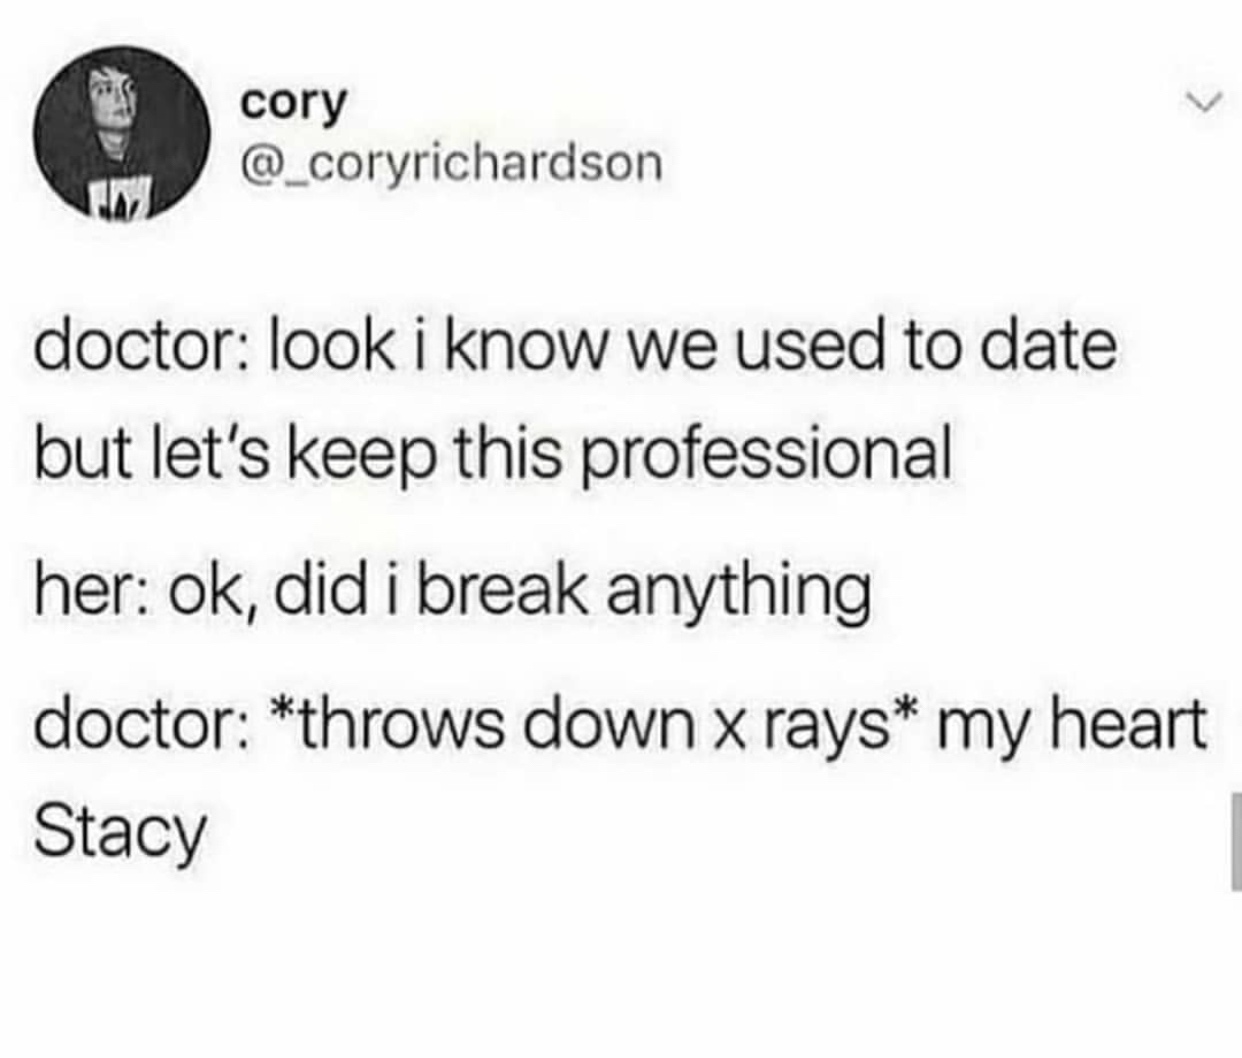 document - cory doctor look i know we used to date but let's keep this professional her ok, did i break anything doctor throws down x rays my heart Stacy